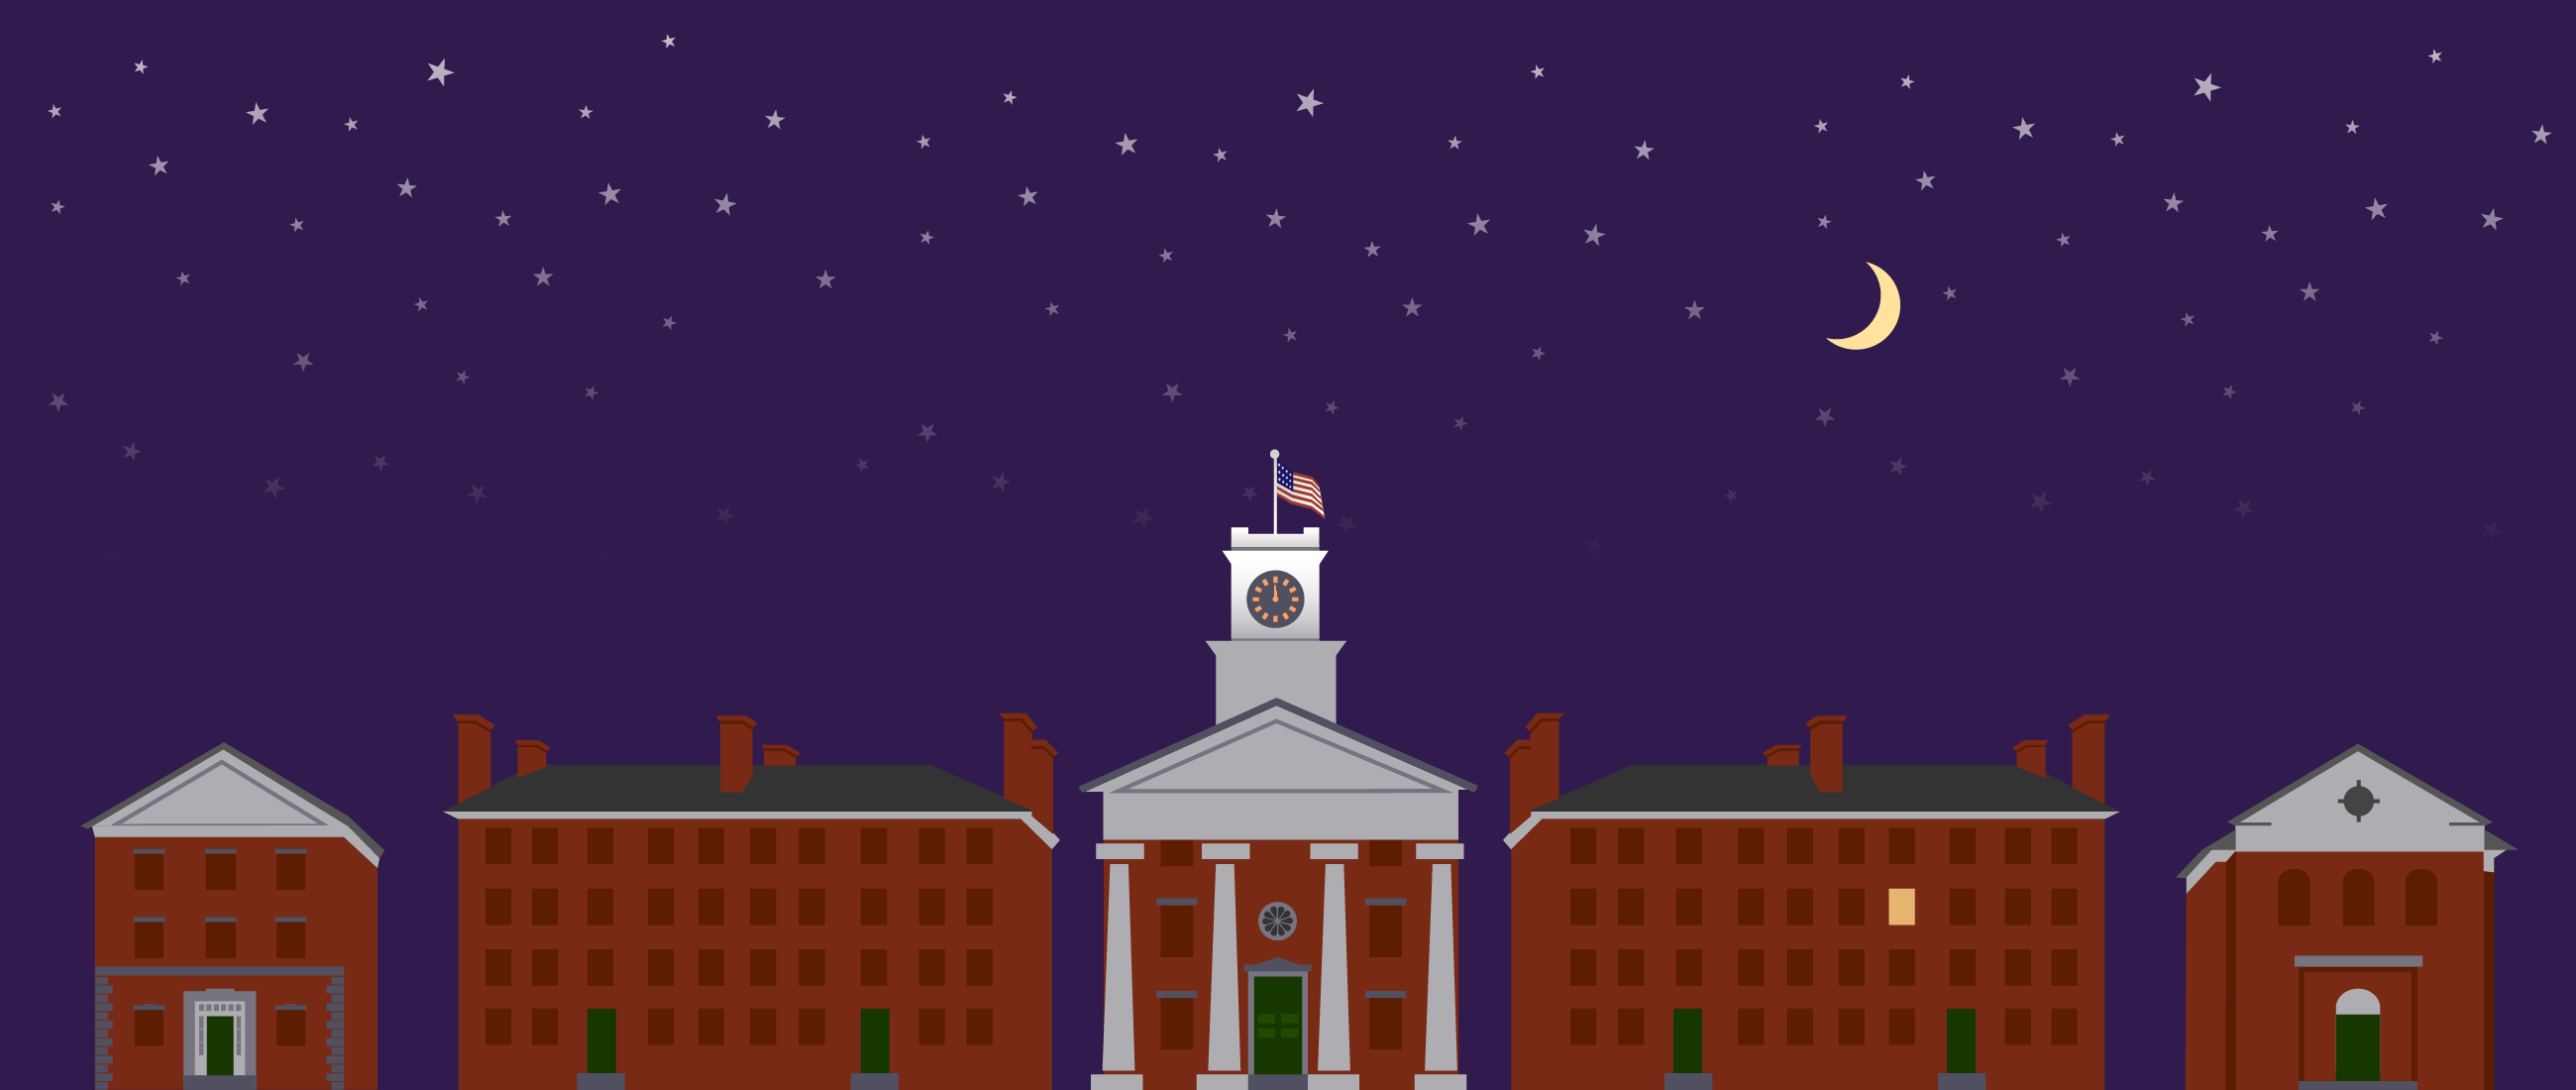 College Row buildings under a starry sky and crescent moon